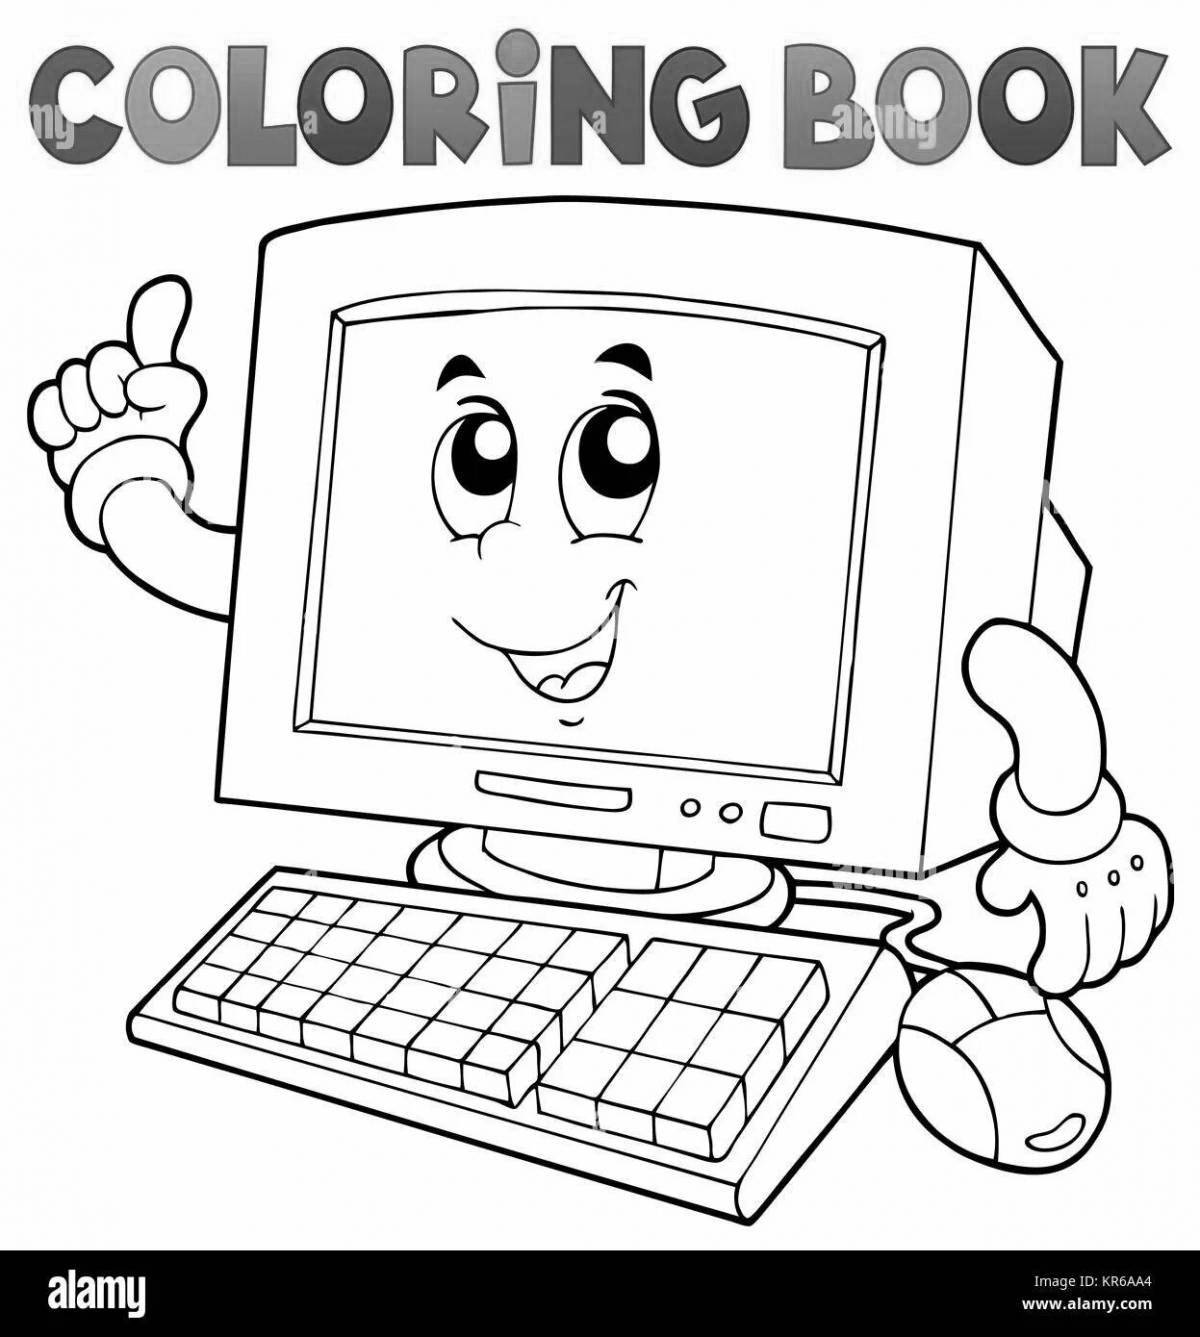 A fun safe internet coloring book for students